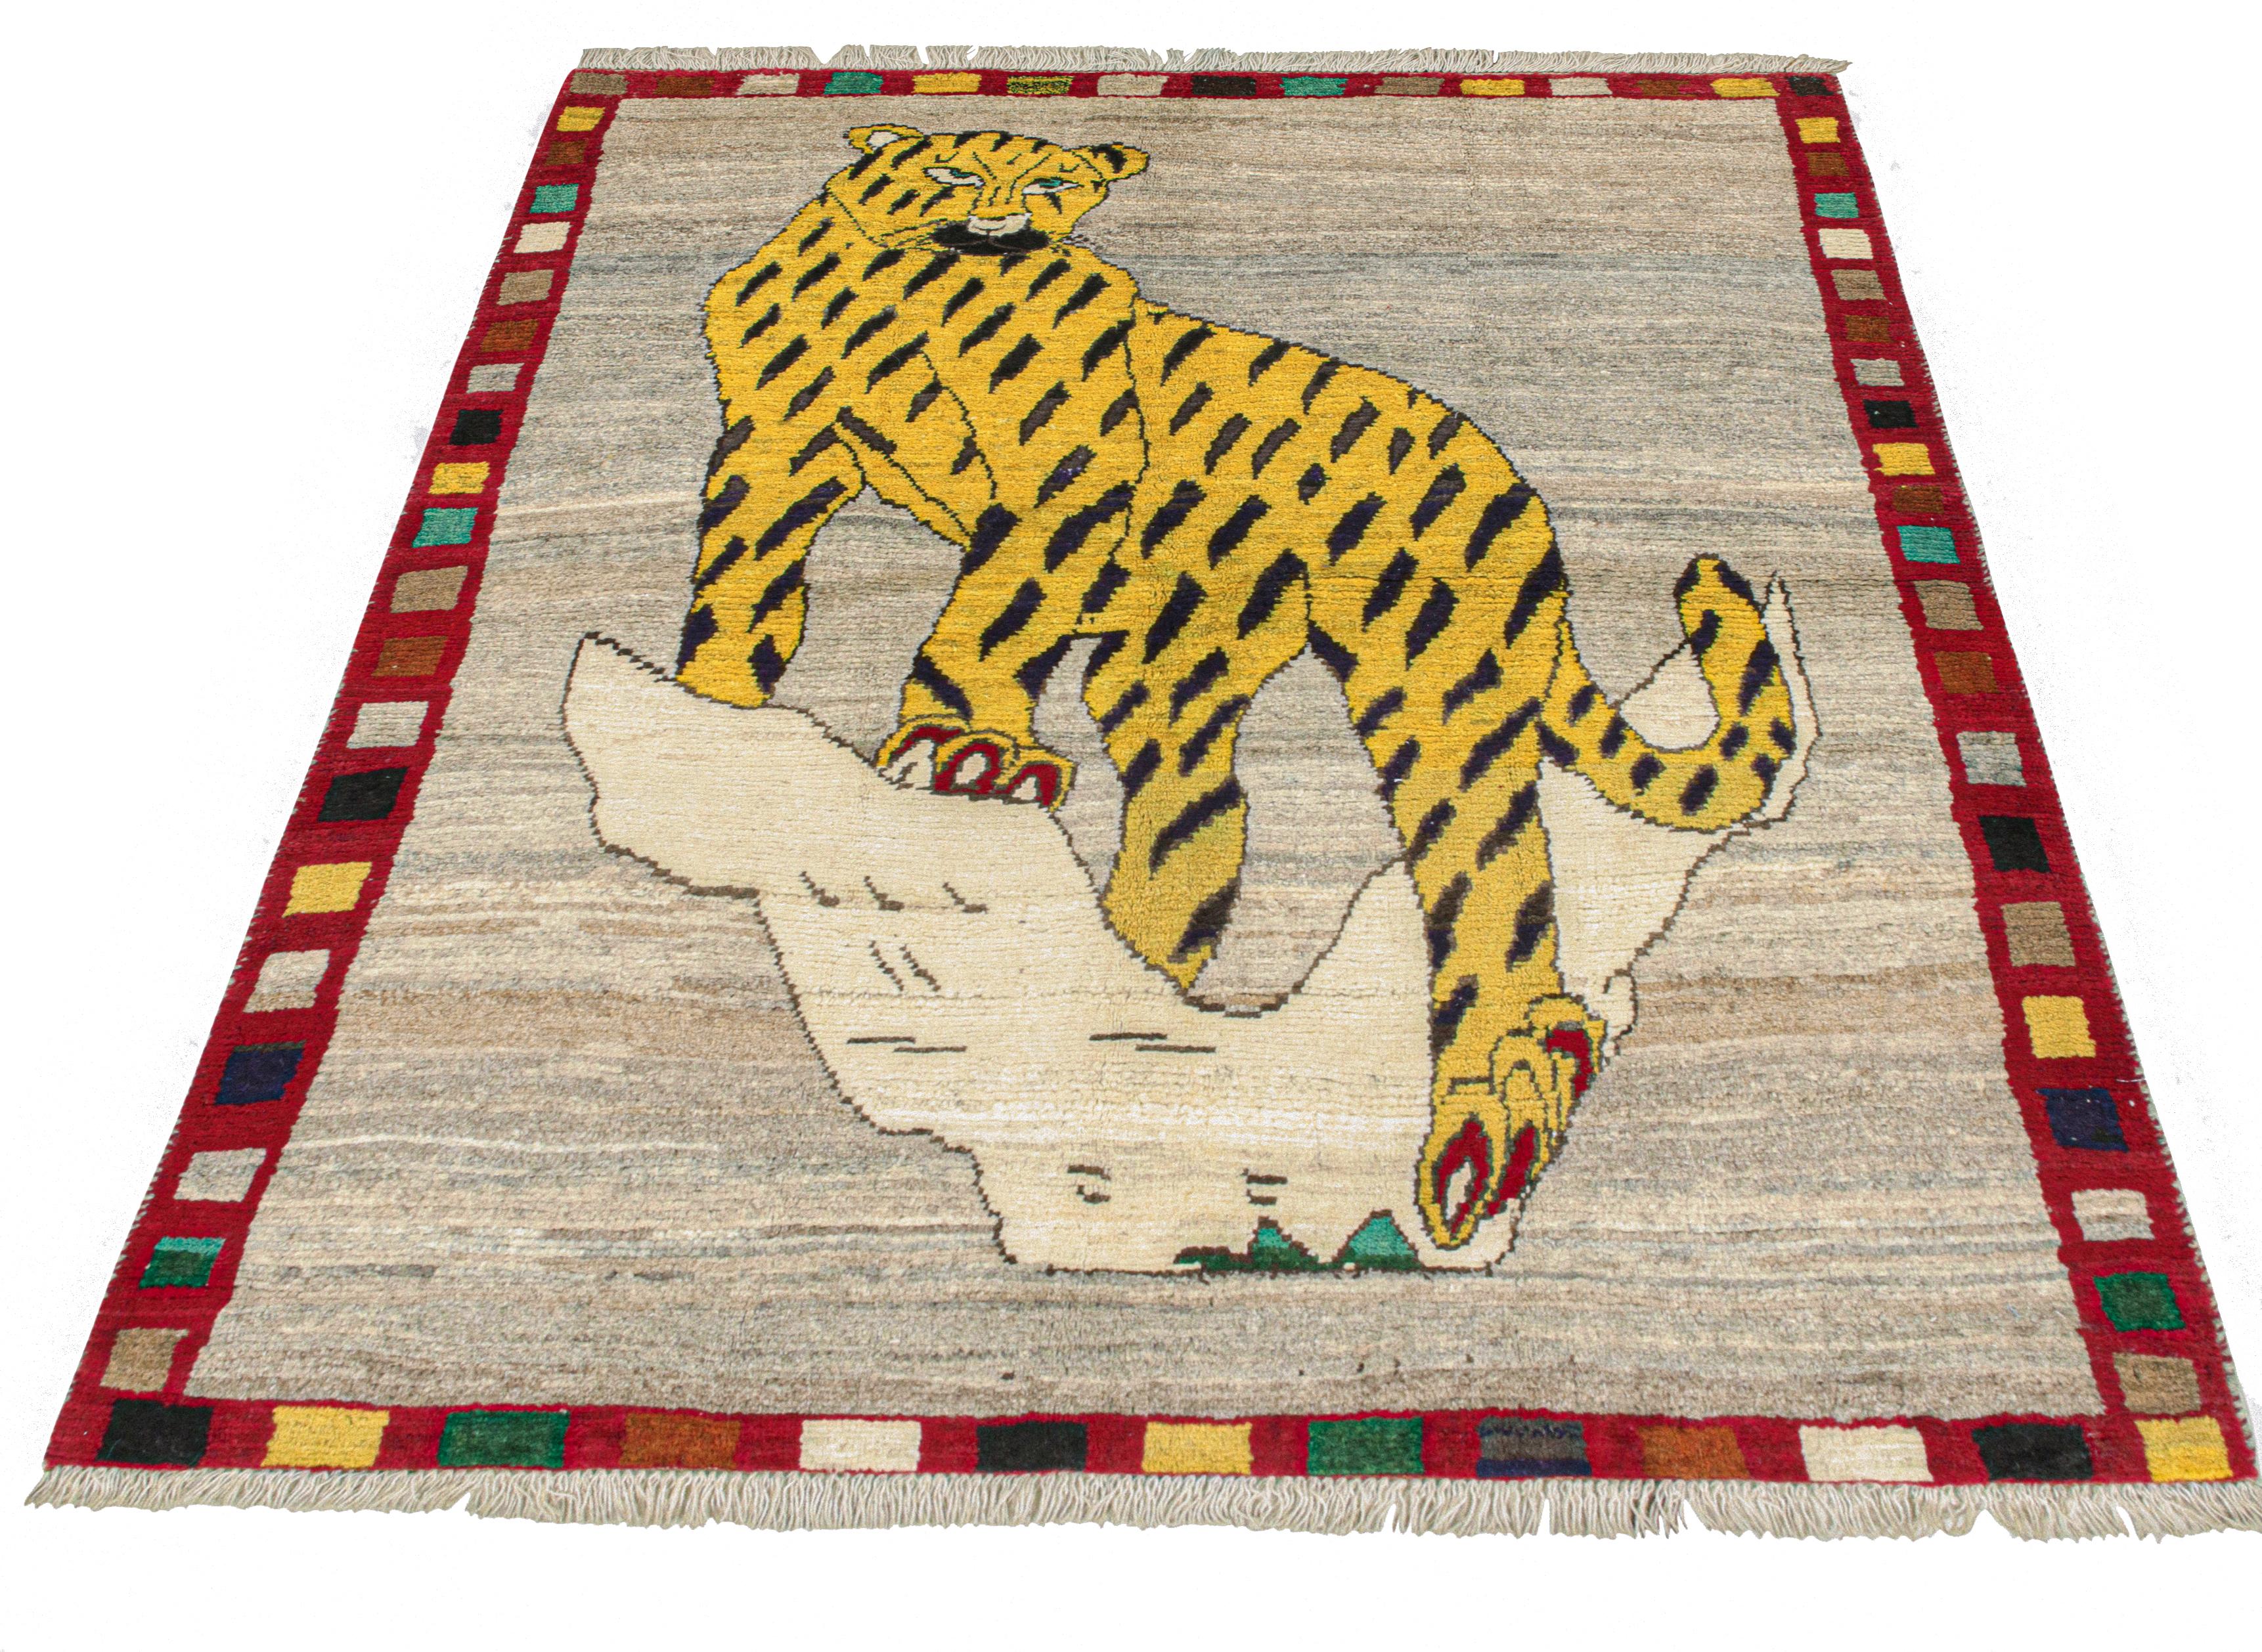 This vintage 5x6 Persian rug is a rare midcentury Gabbeh piece that originates from the Qashqai tribe. Hand-knotted in wool circa 1950-1960, its design is a pictorial that resembles a leopard, or possibly a jaguar. 

The design is a daring,